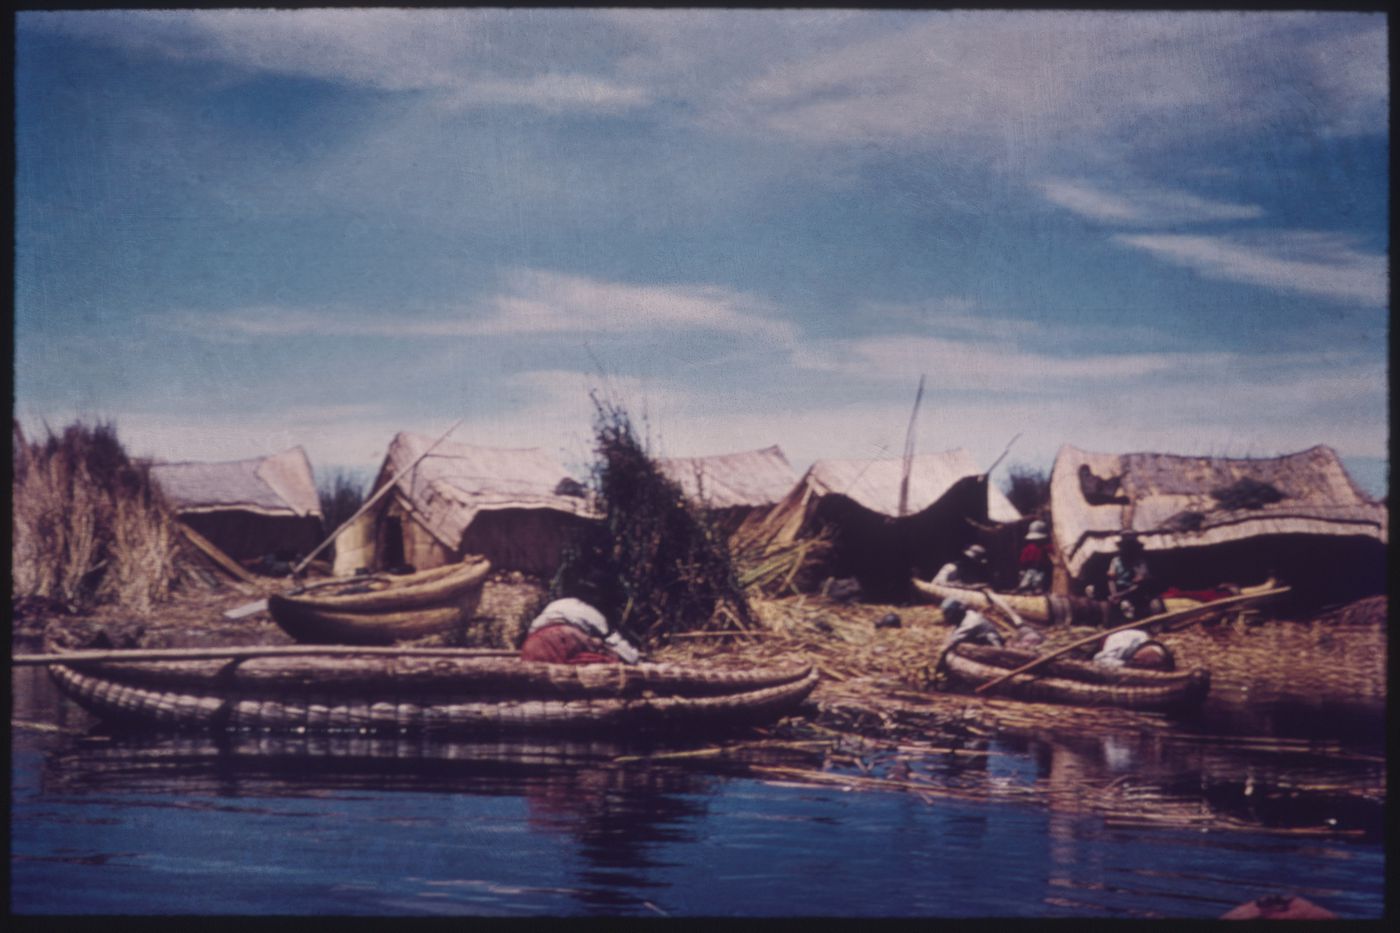 Portrait of some Qhas Qut suñi (Uru people) near the water's edge on a floating island on Titicaca Lake, Peru and Bolivia